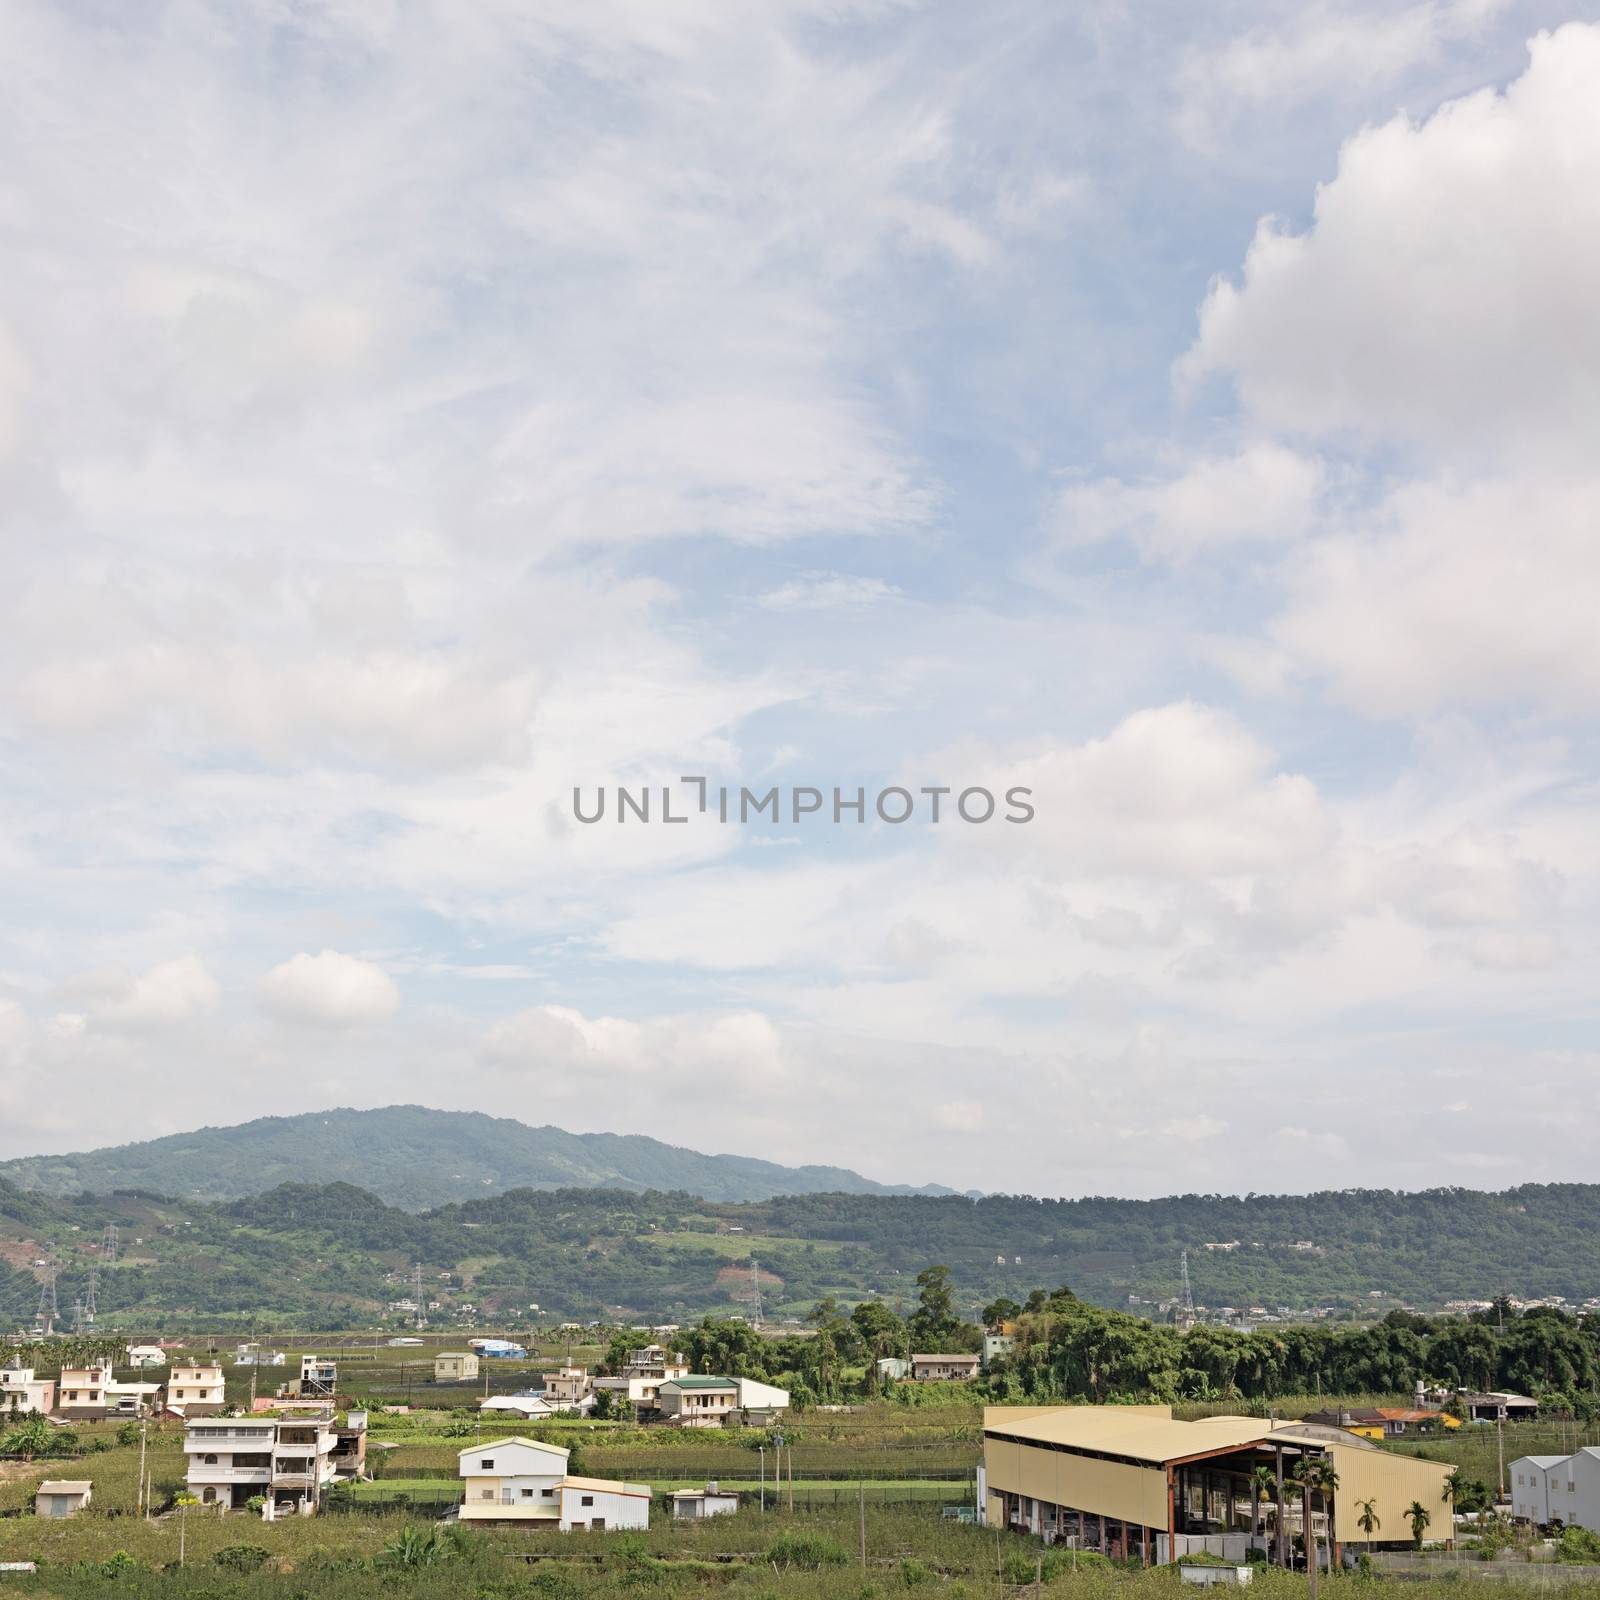 Landscape of rural scenery with copyspace on sky, Taiwan, Asia.